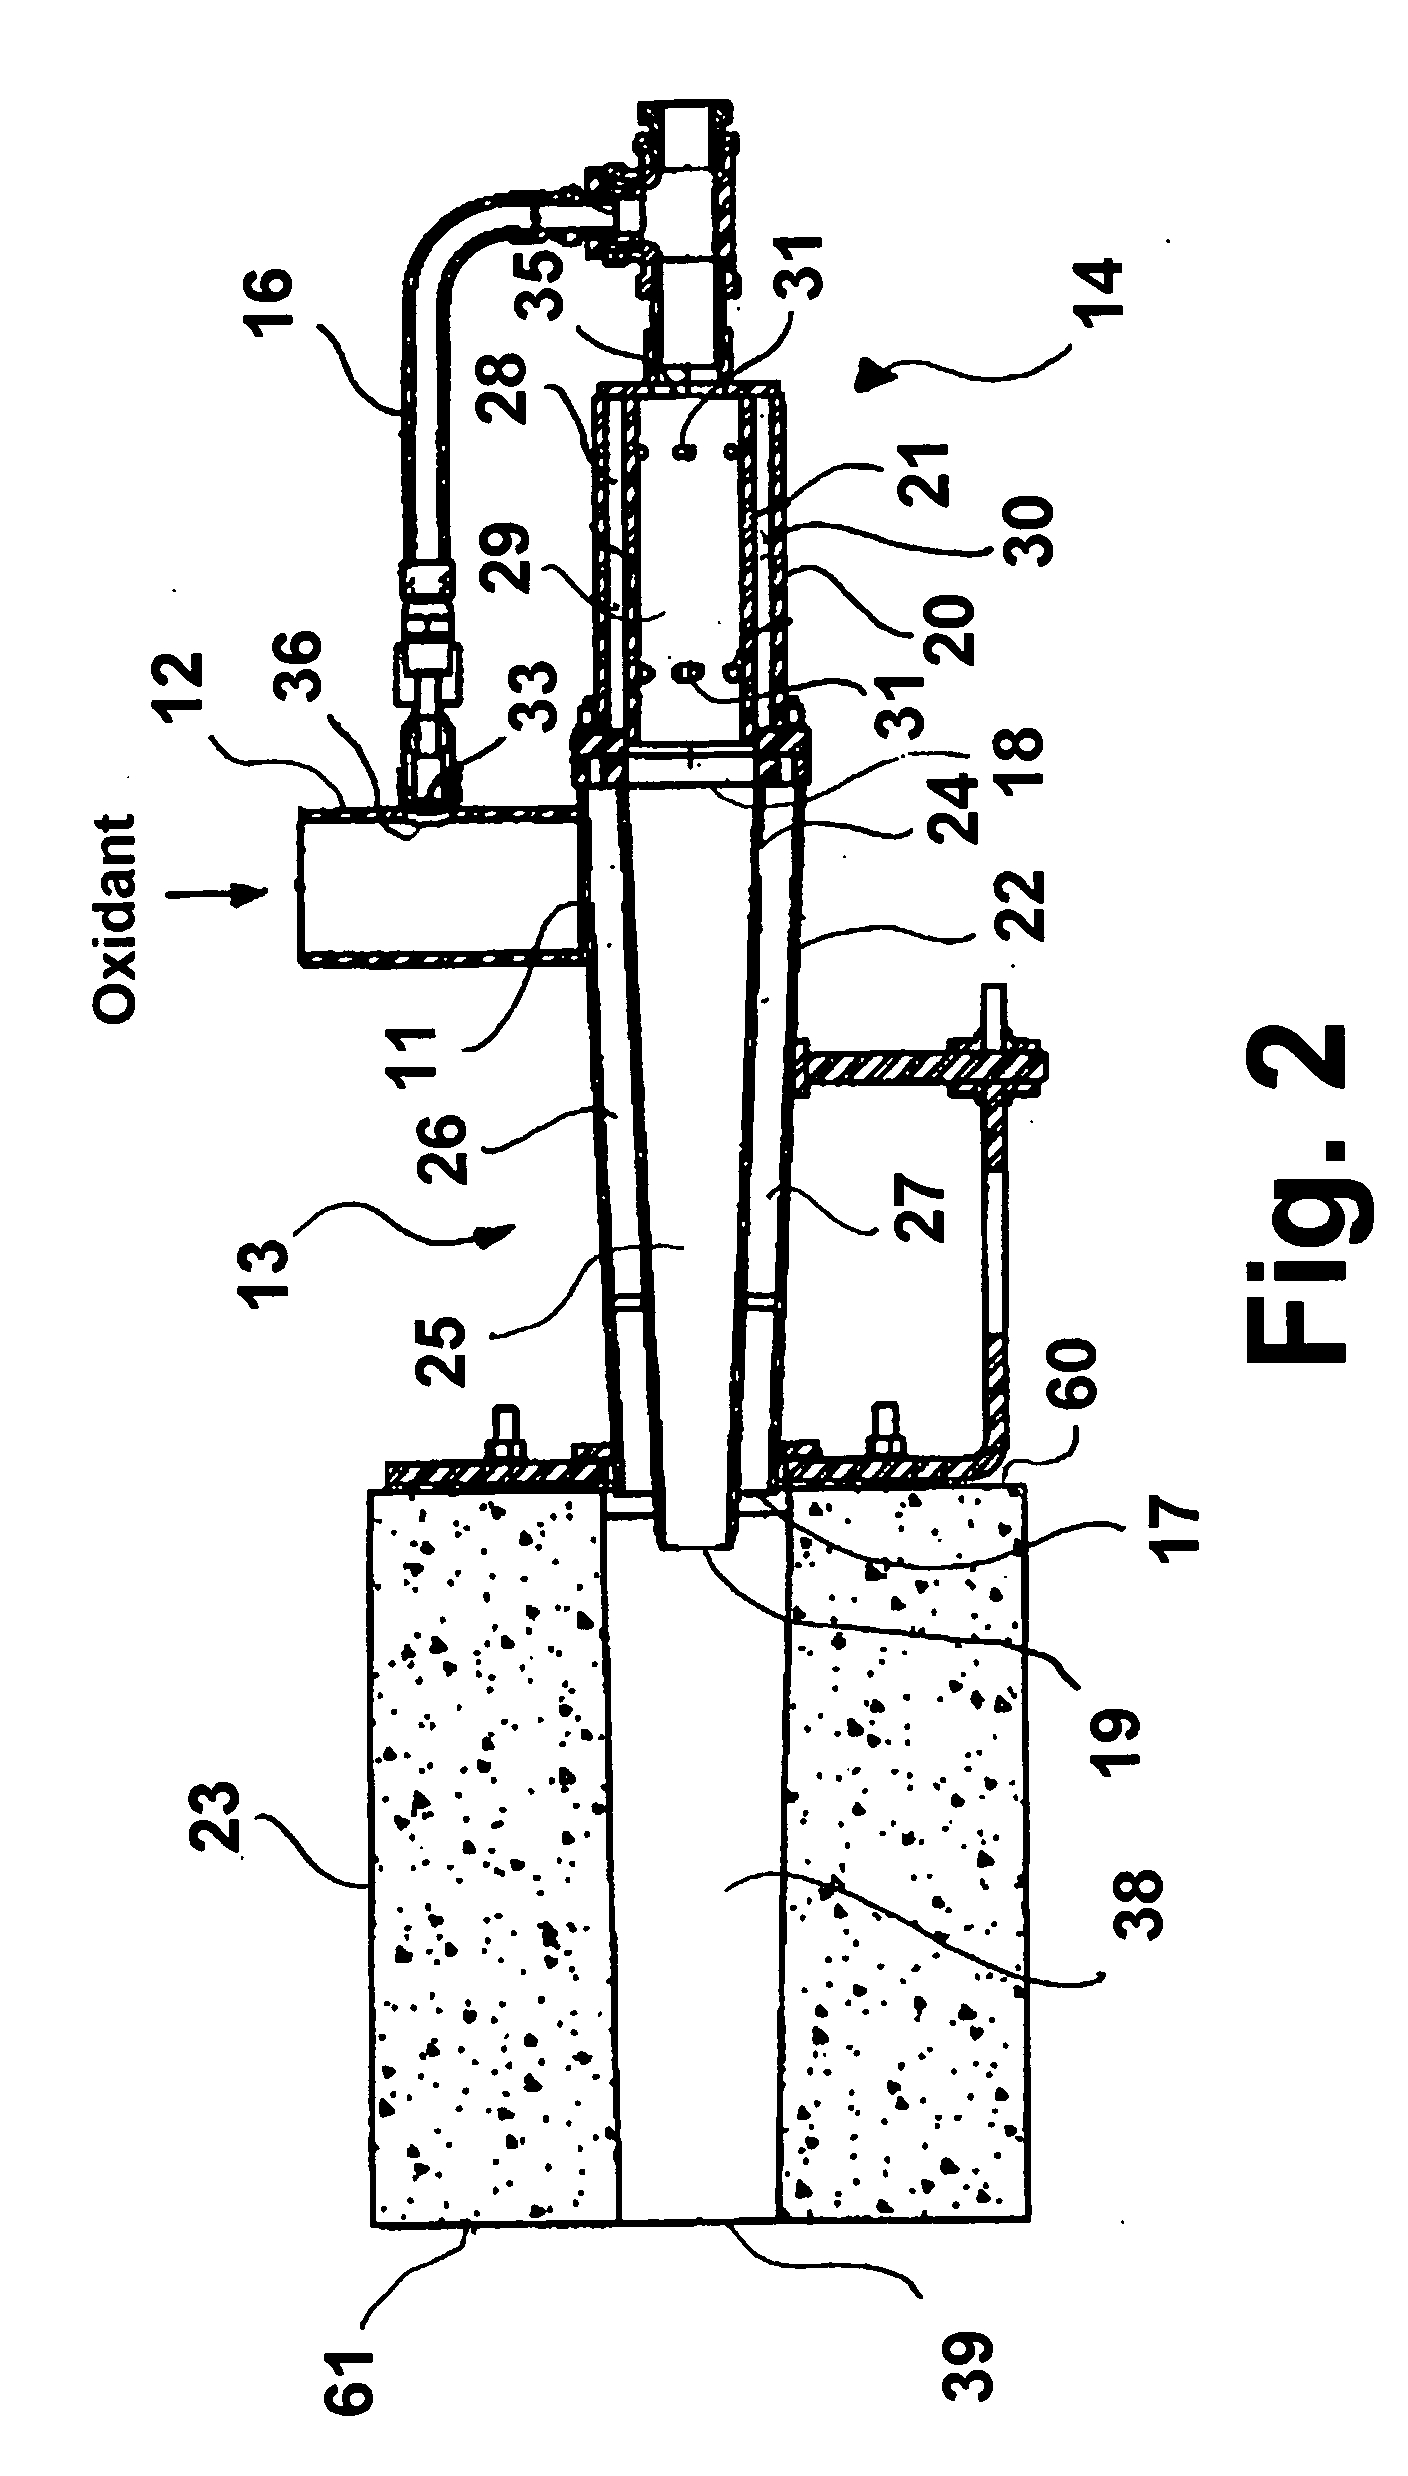 High-heat transfer low-nox combustion system